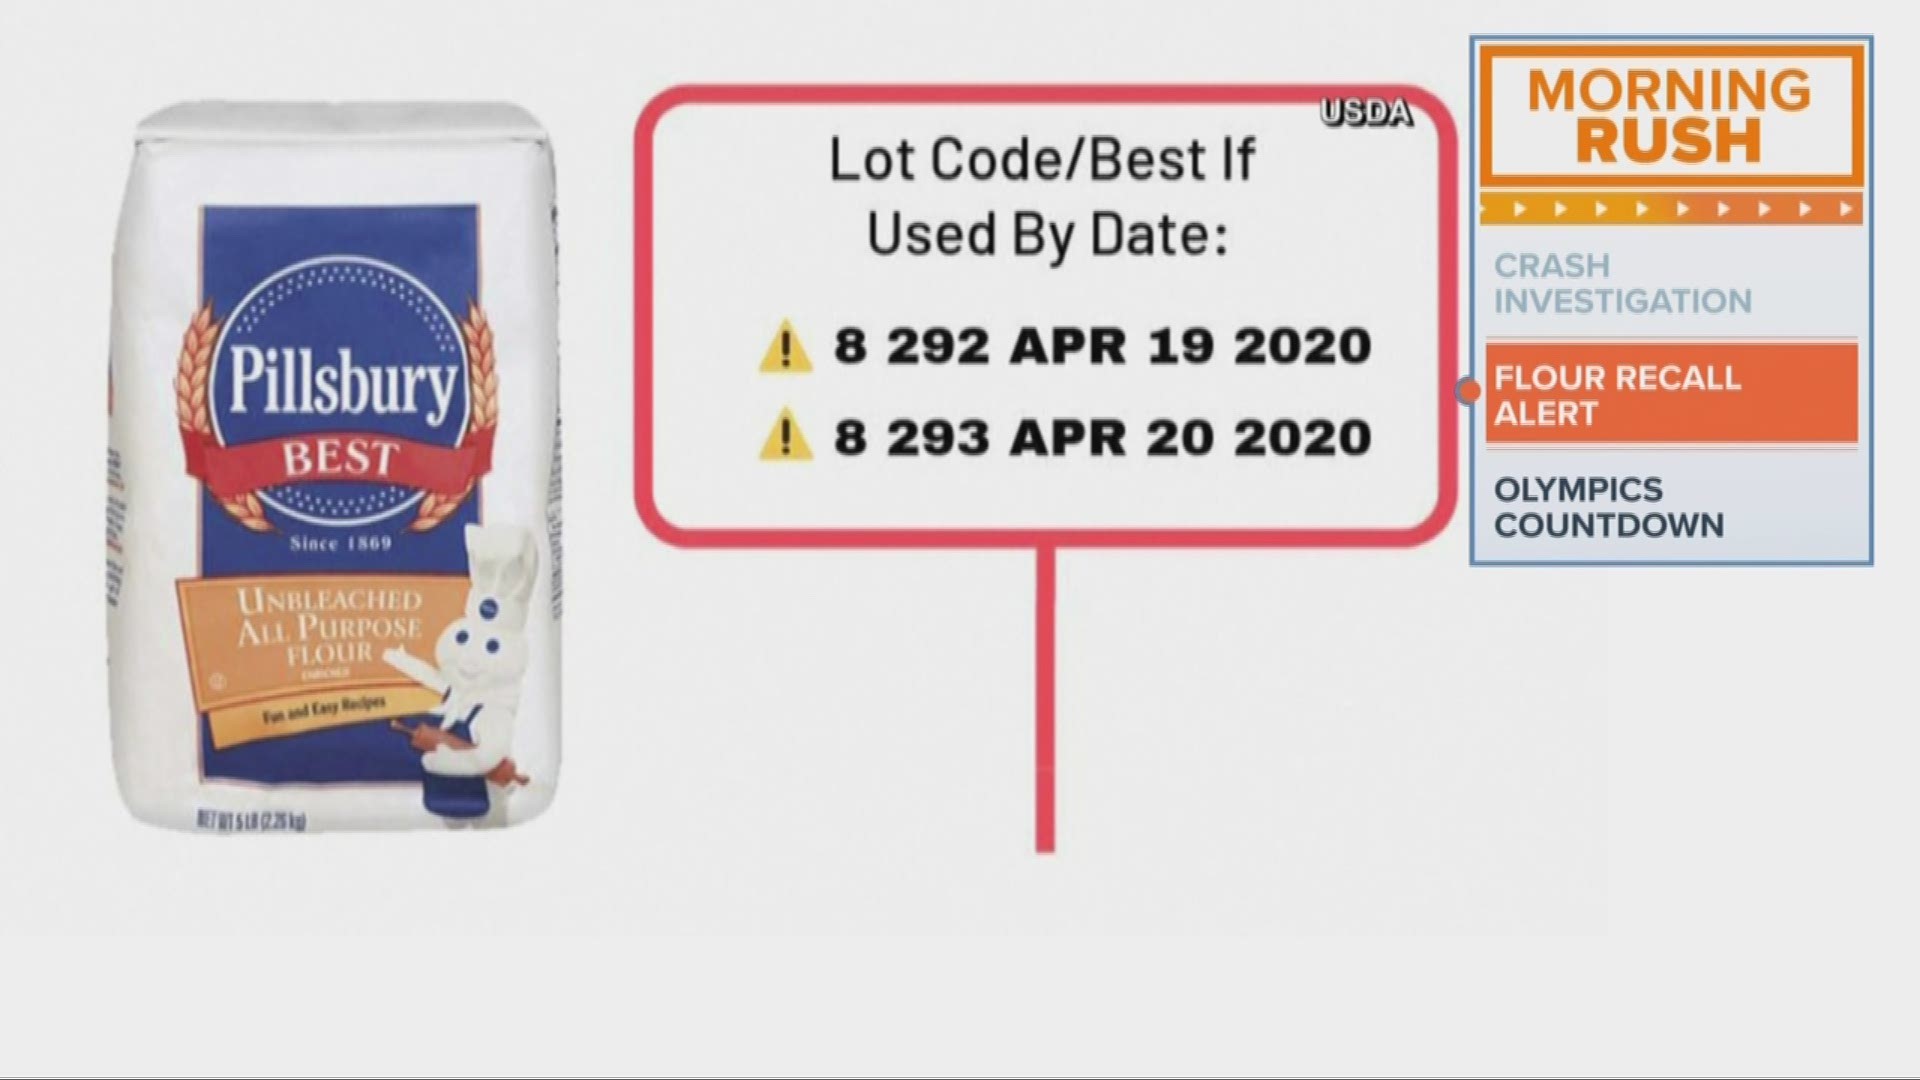 March 12, 2019: Check your pantry! Hometown Food Company is voluntarily recalling 12,245 cases of Pillsbury unbleached all purpose flour because of possible salmonella contamination. The five-pound bags included in the recall were distributed in retailers nationwide.